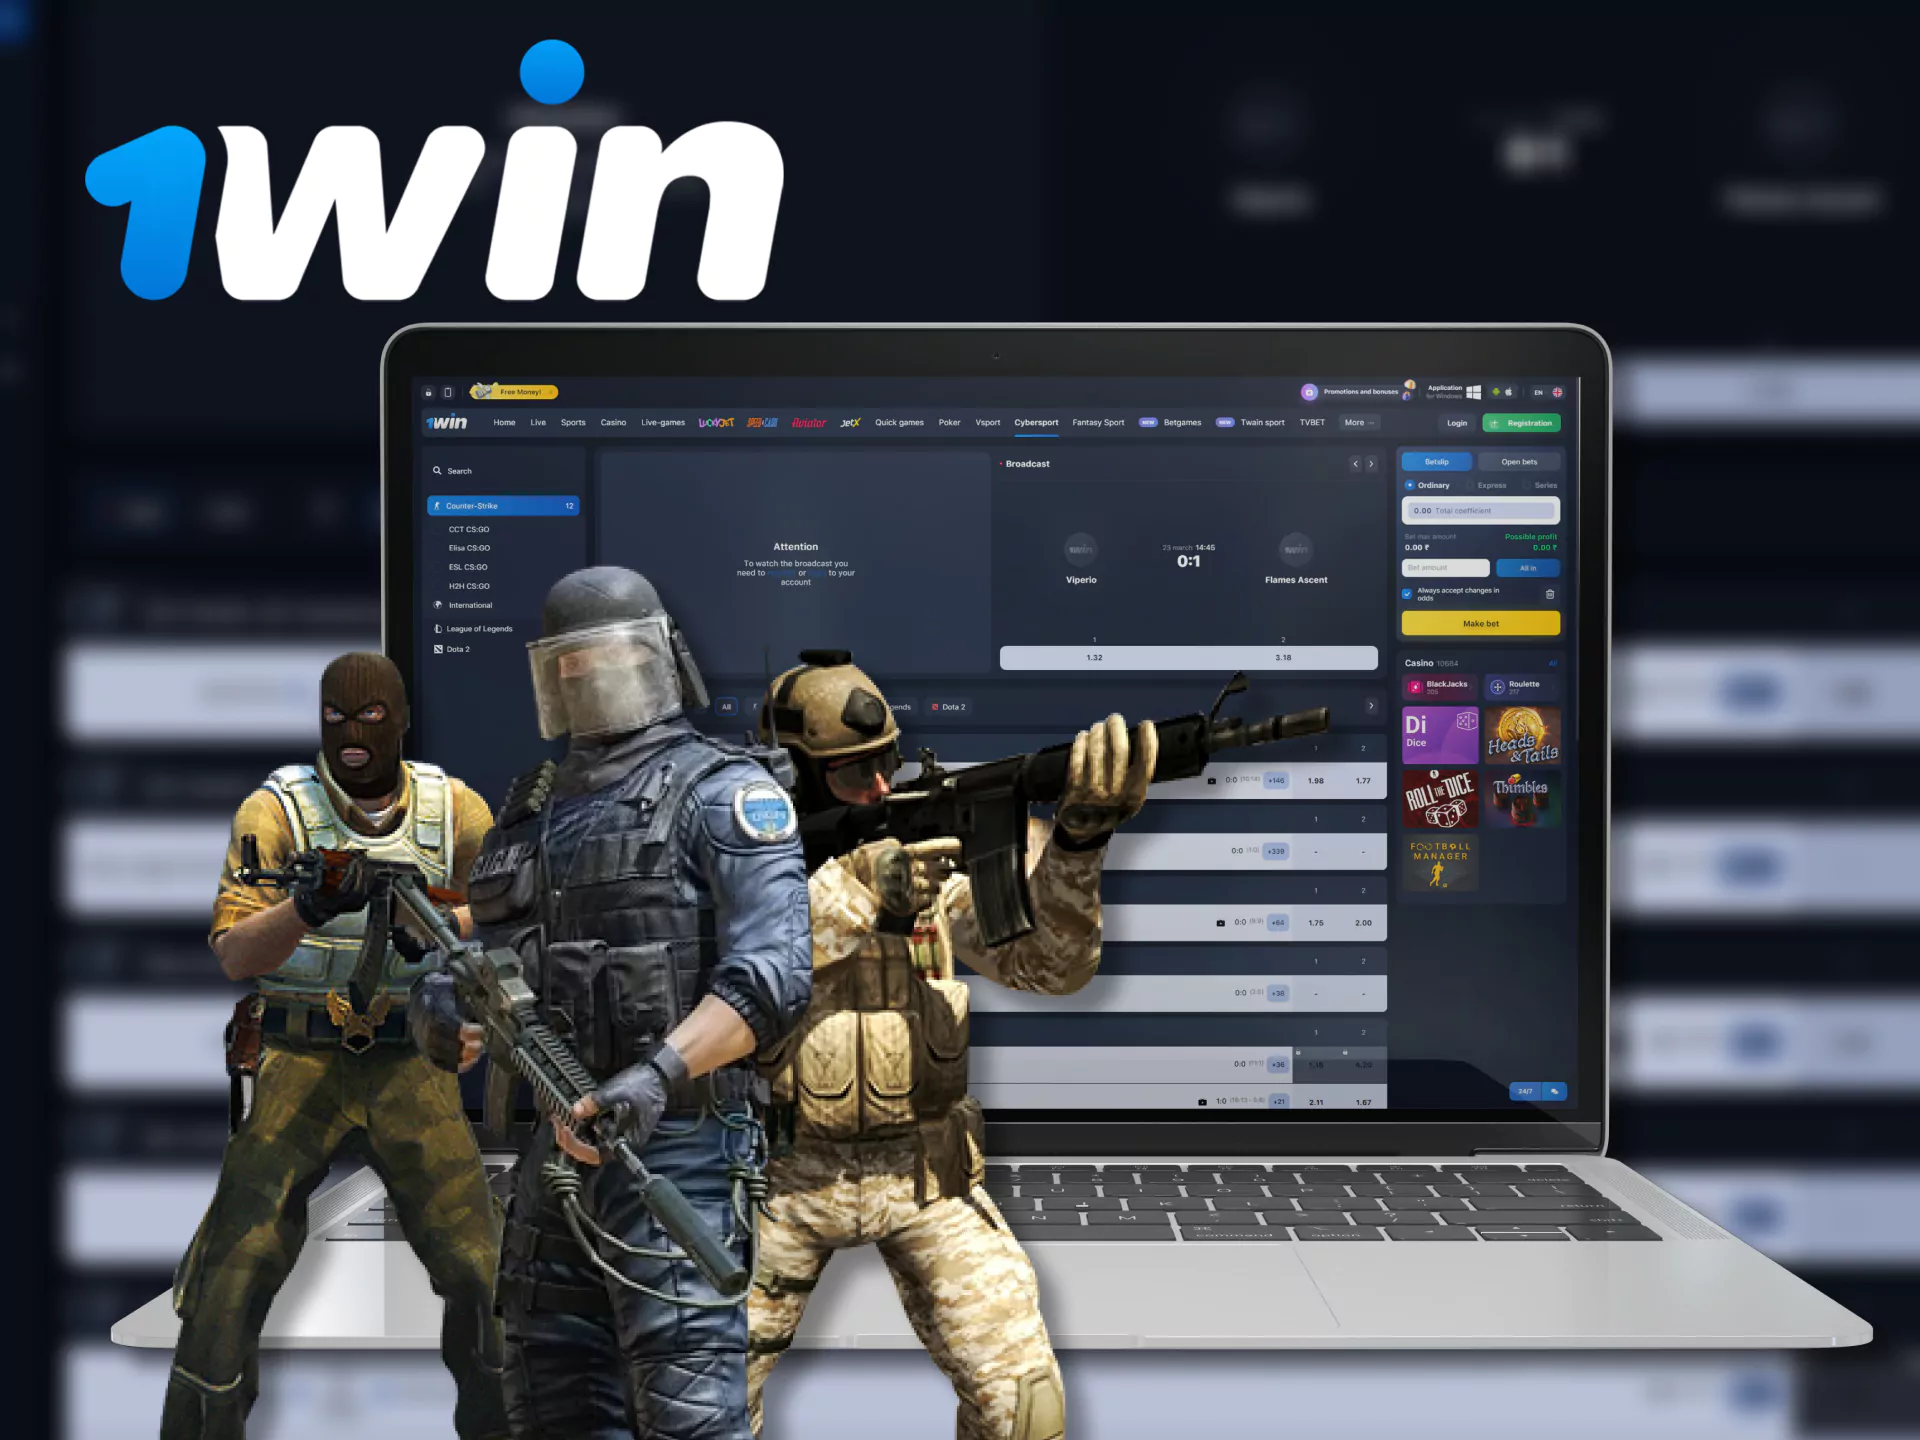 At 1Win, you can bet on CS:GO tournaments.